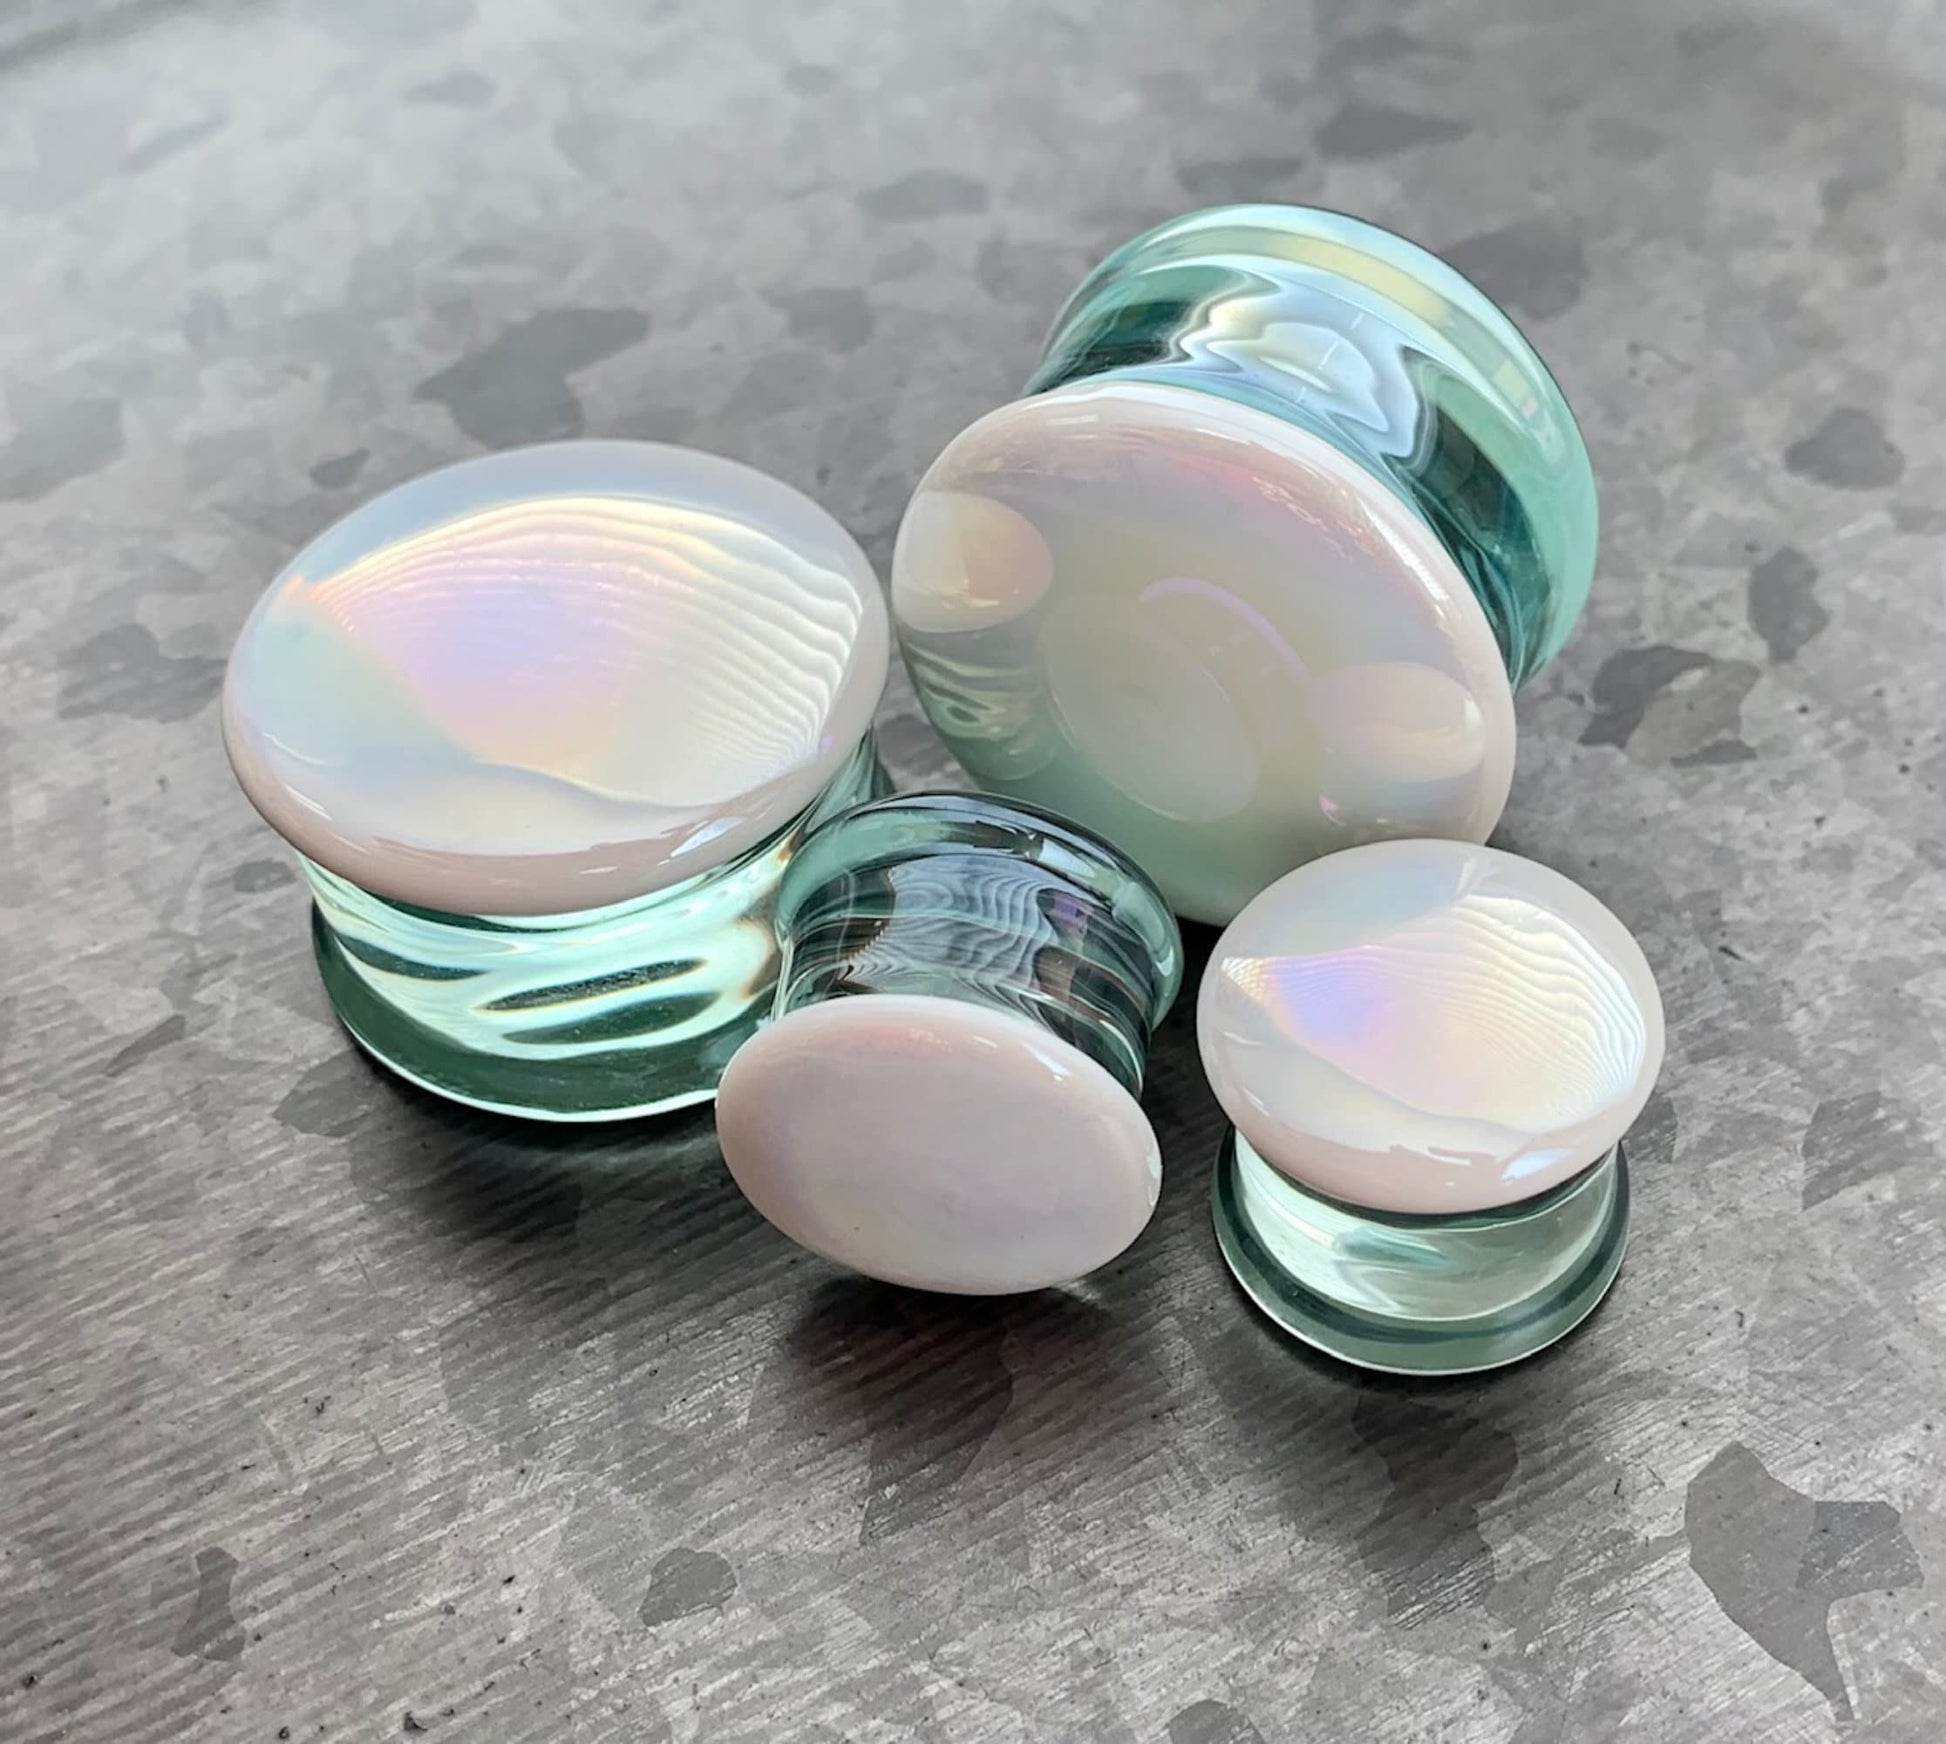 PAIR of Unique White Pearl Design Pyrex Glass Double Flare Plugs - Gauges 12mm through 1&3/16" (30mm) available!